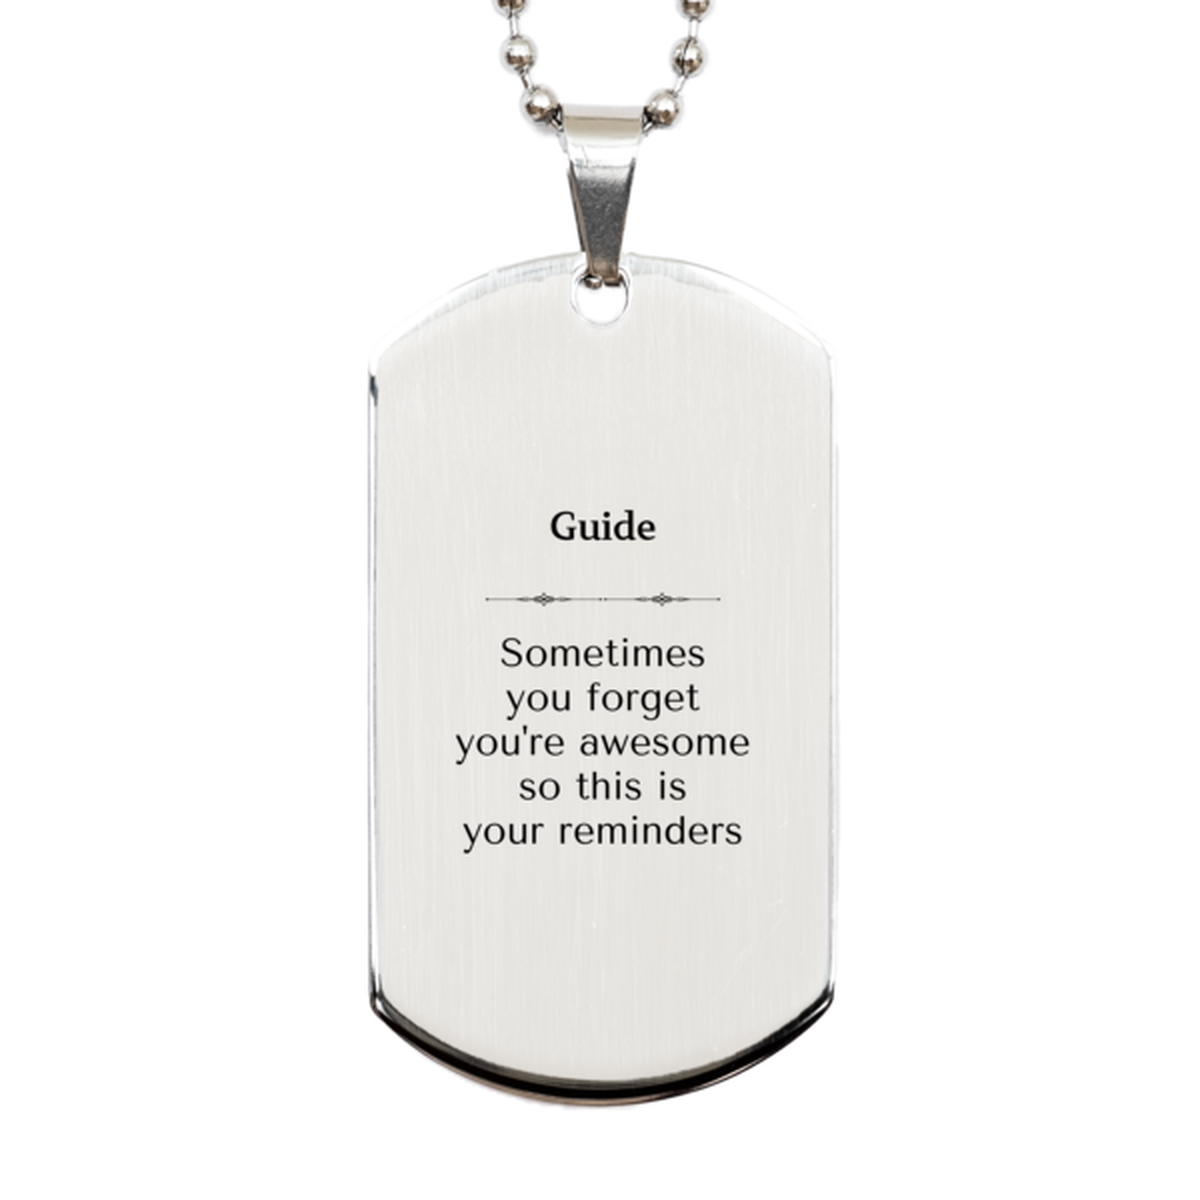 Sentimental Guide Silver Dog Tag, Guide Sometimes you forget you're awesome so this is your reminders, Graduation Christmas Birthday Gifts for Guide, Men, Women, Coworkers